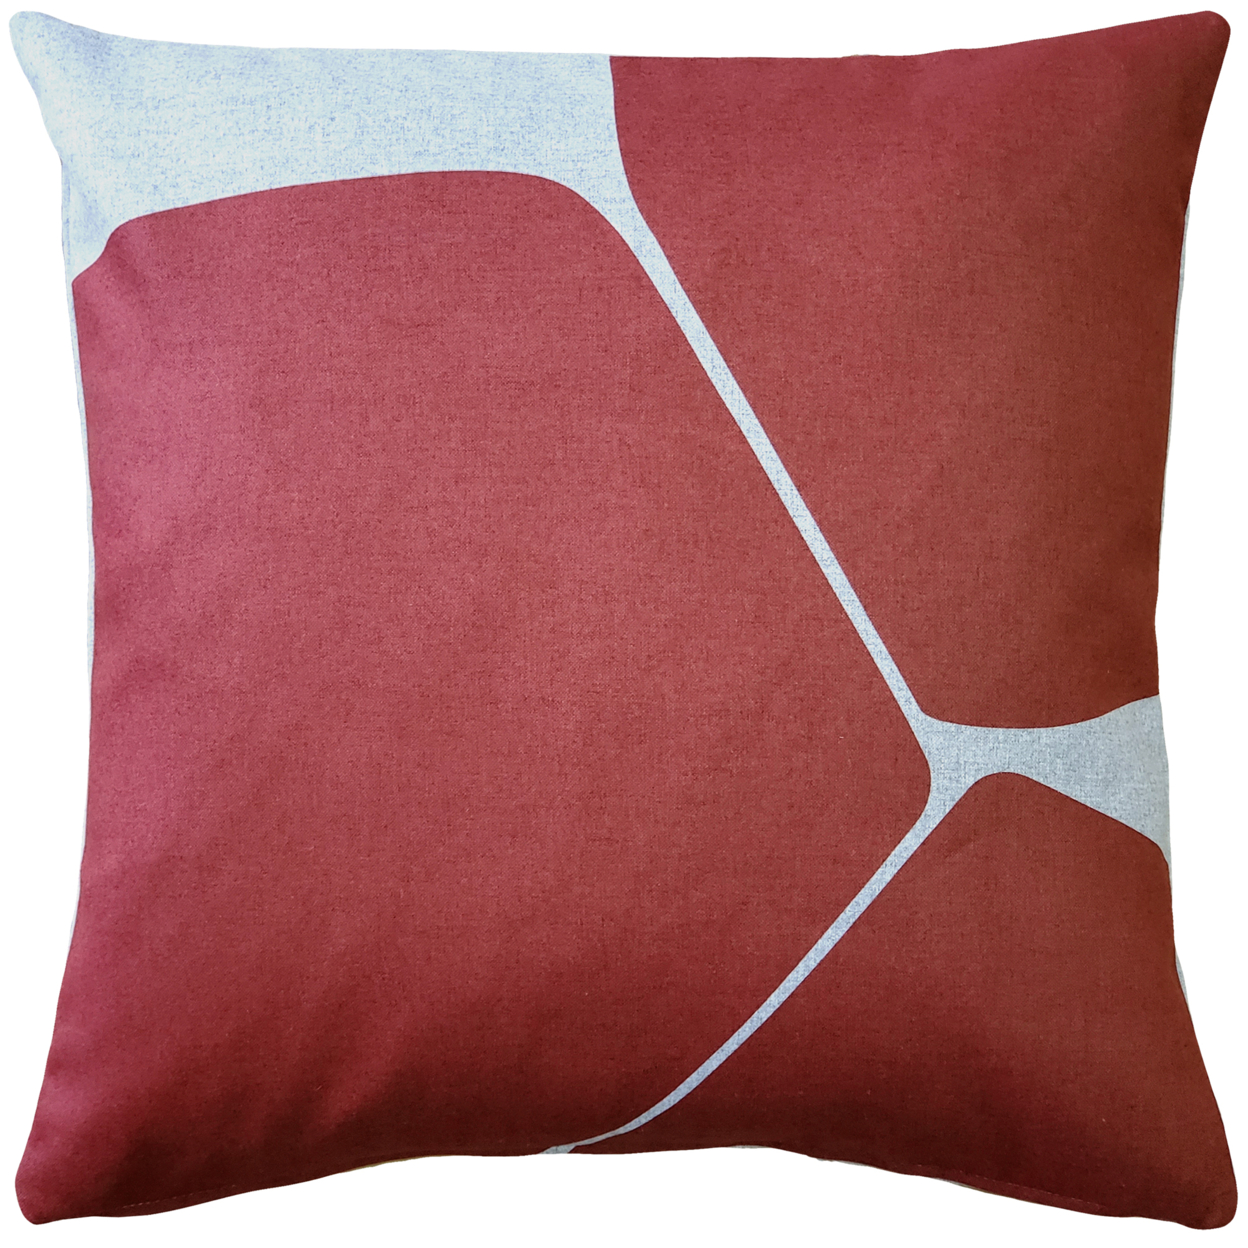 Aurora Spanish Red Throw Pillow 19x19 Inches Square, Complete Pillow with Polyfill Pillow Insert